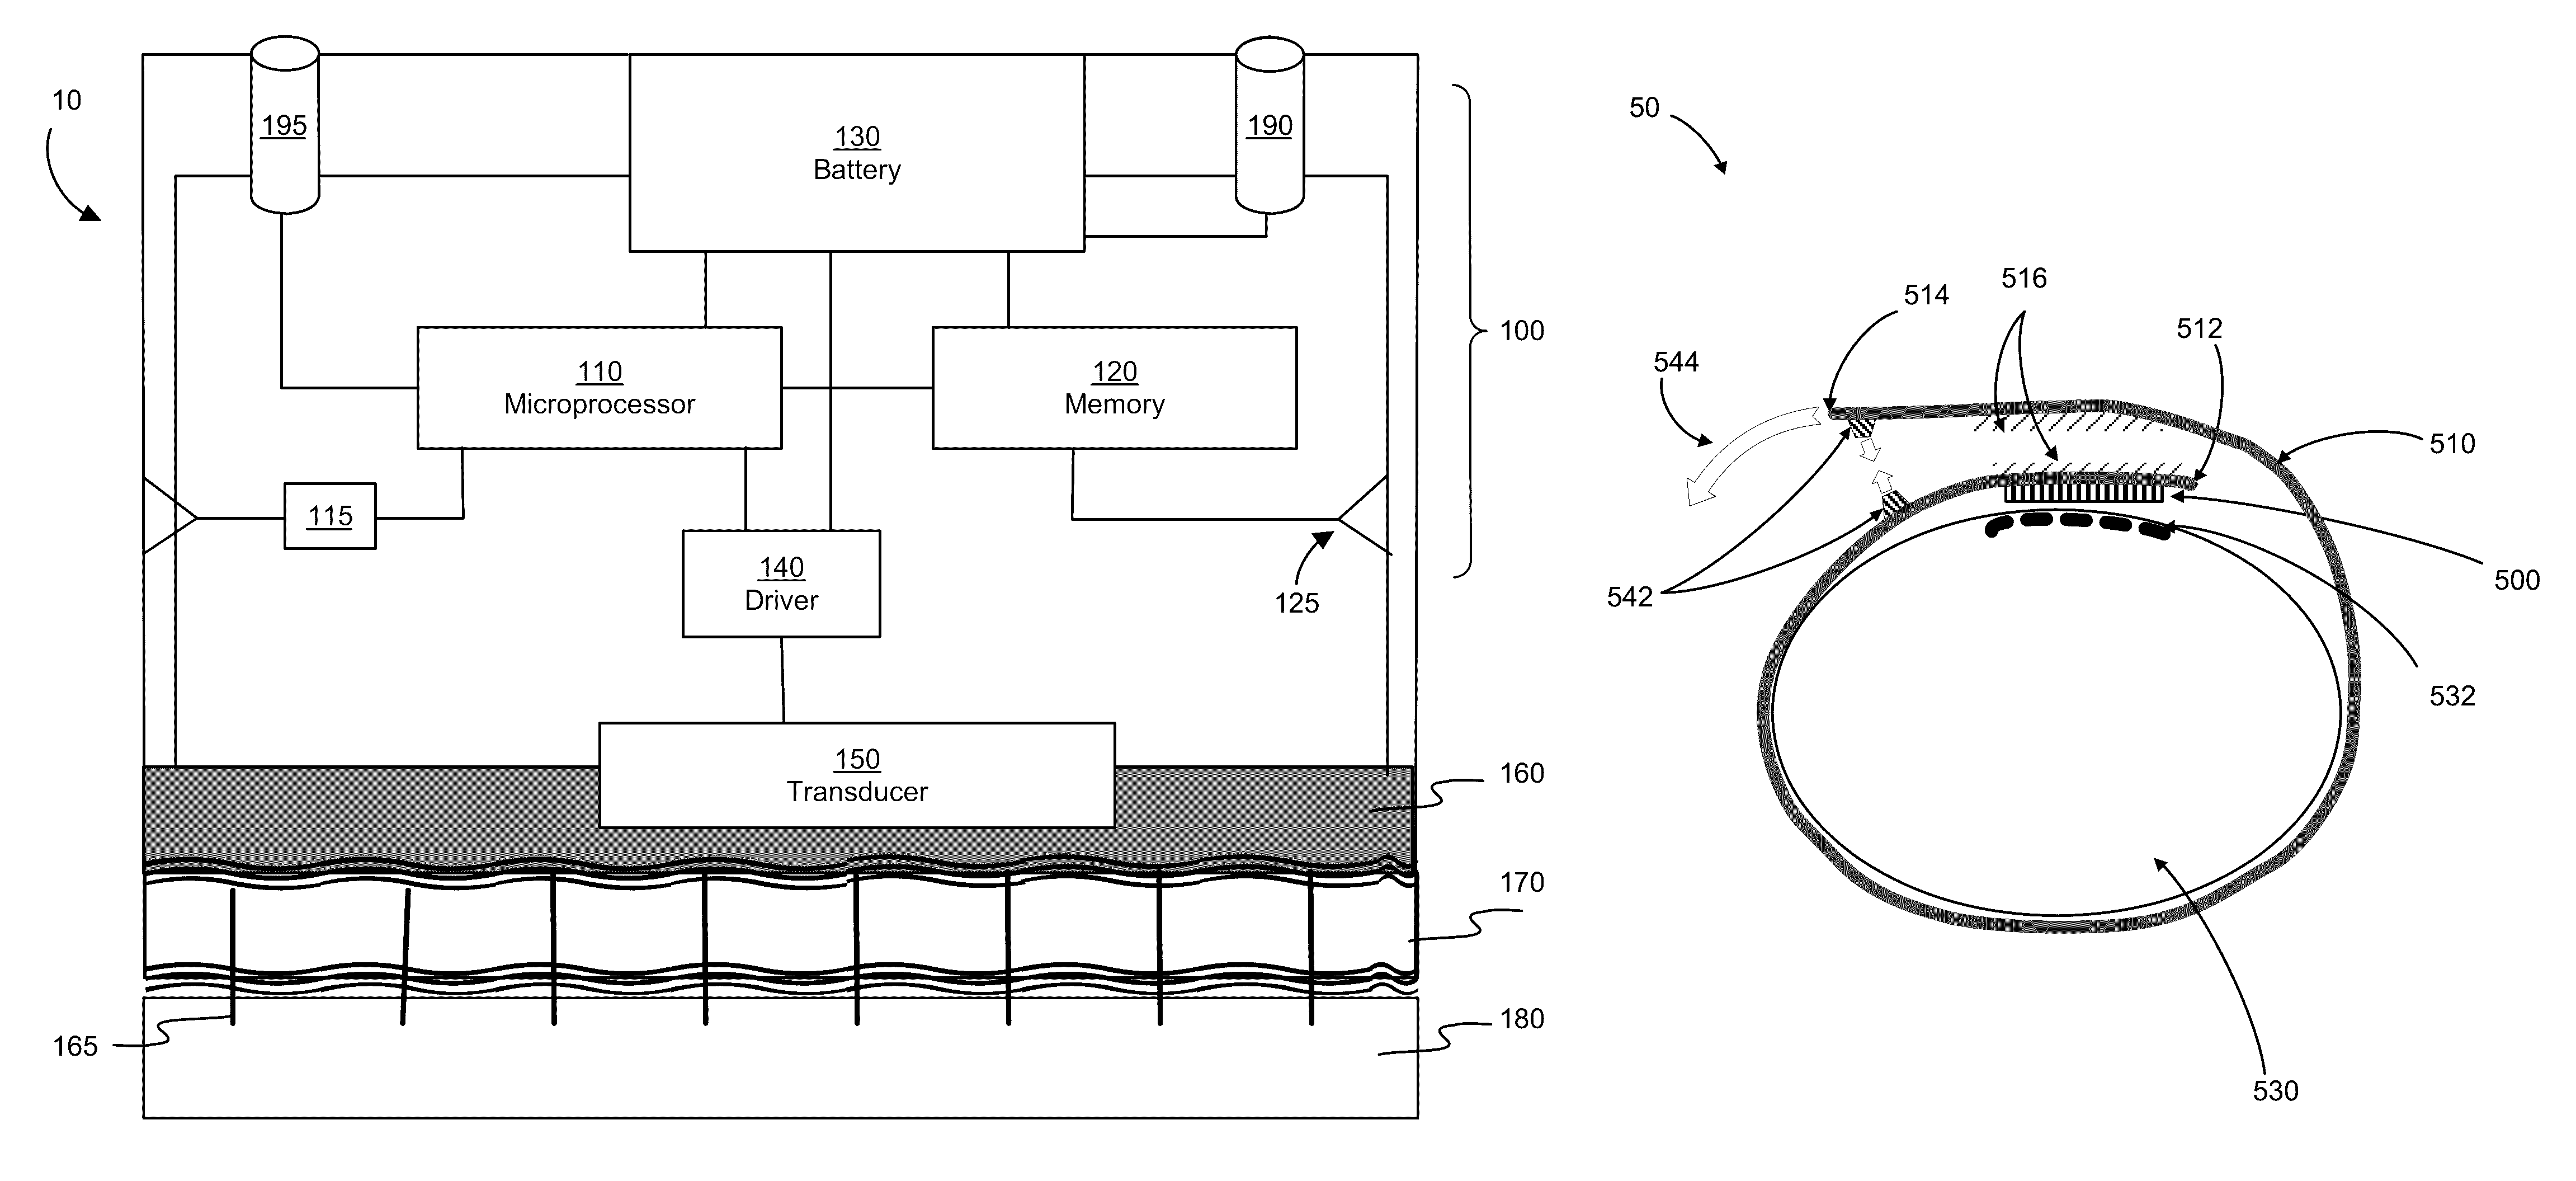 Apparatus for localized dermatological treatment